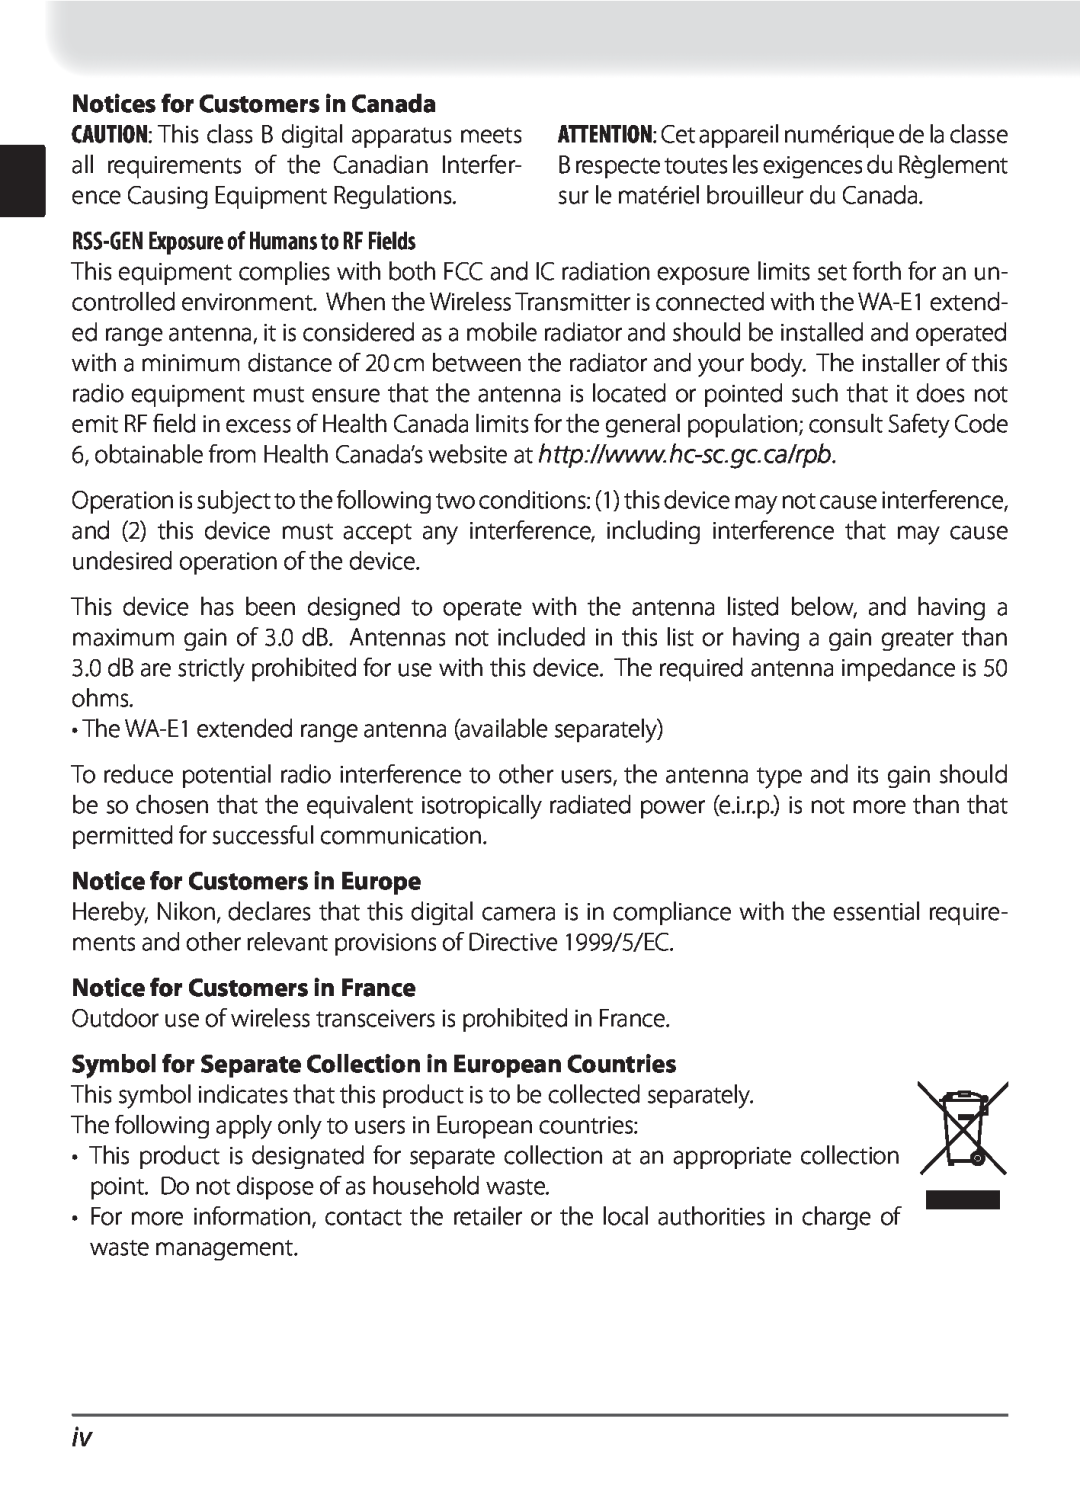 Nikon WT-3 RSS-GEN Exposure of Humans to RF Fields, Notice for Customers in Europe, Notice for Customers in France 